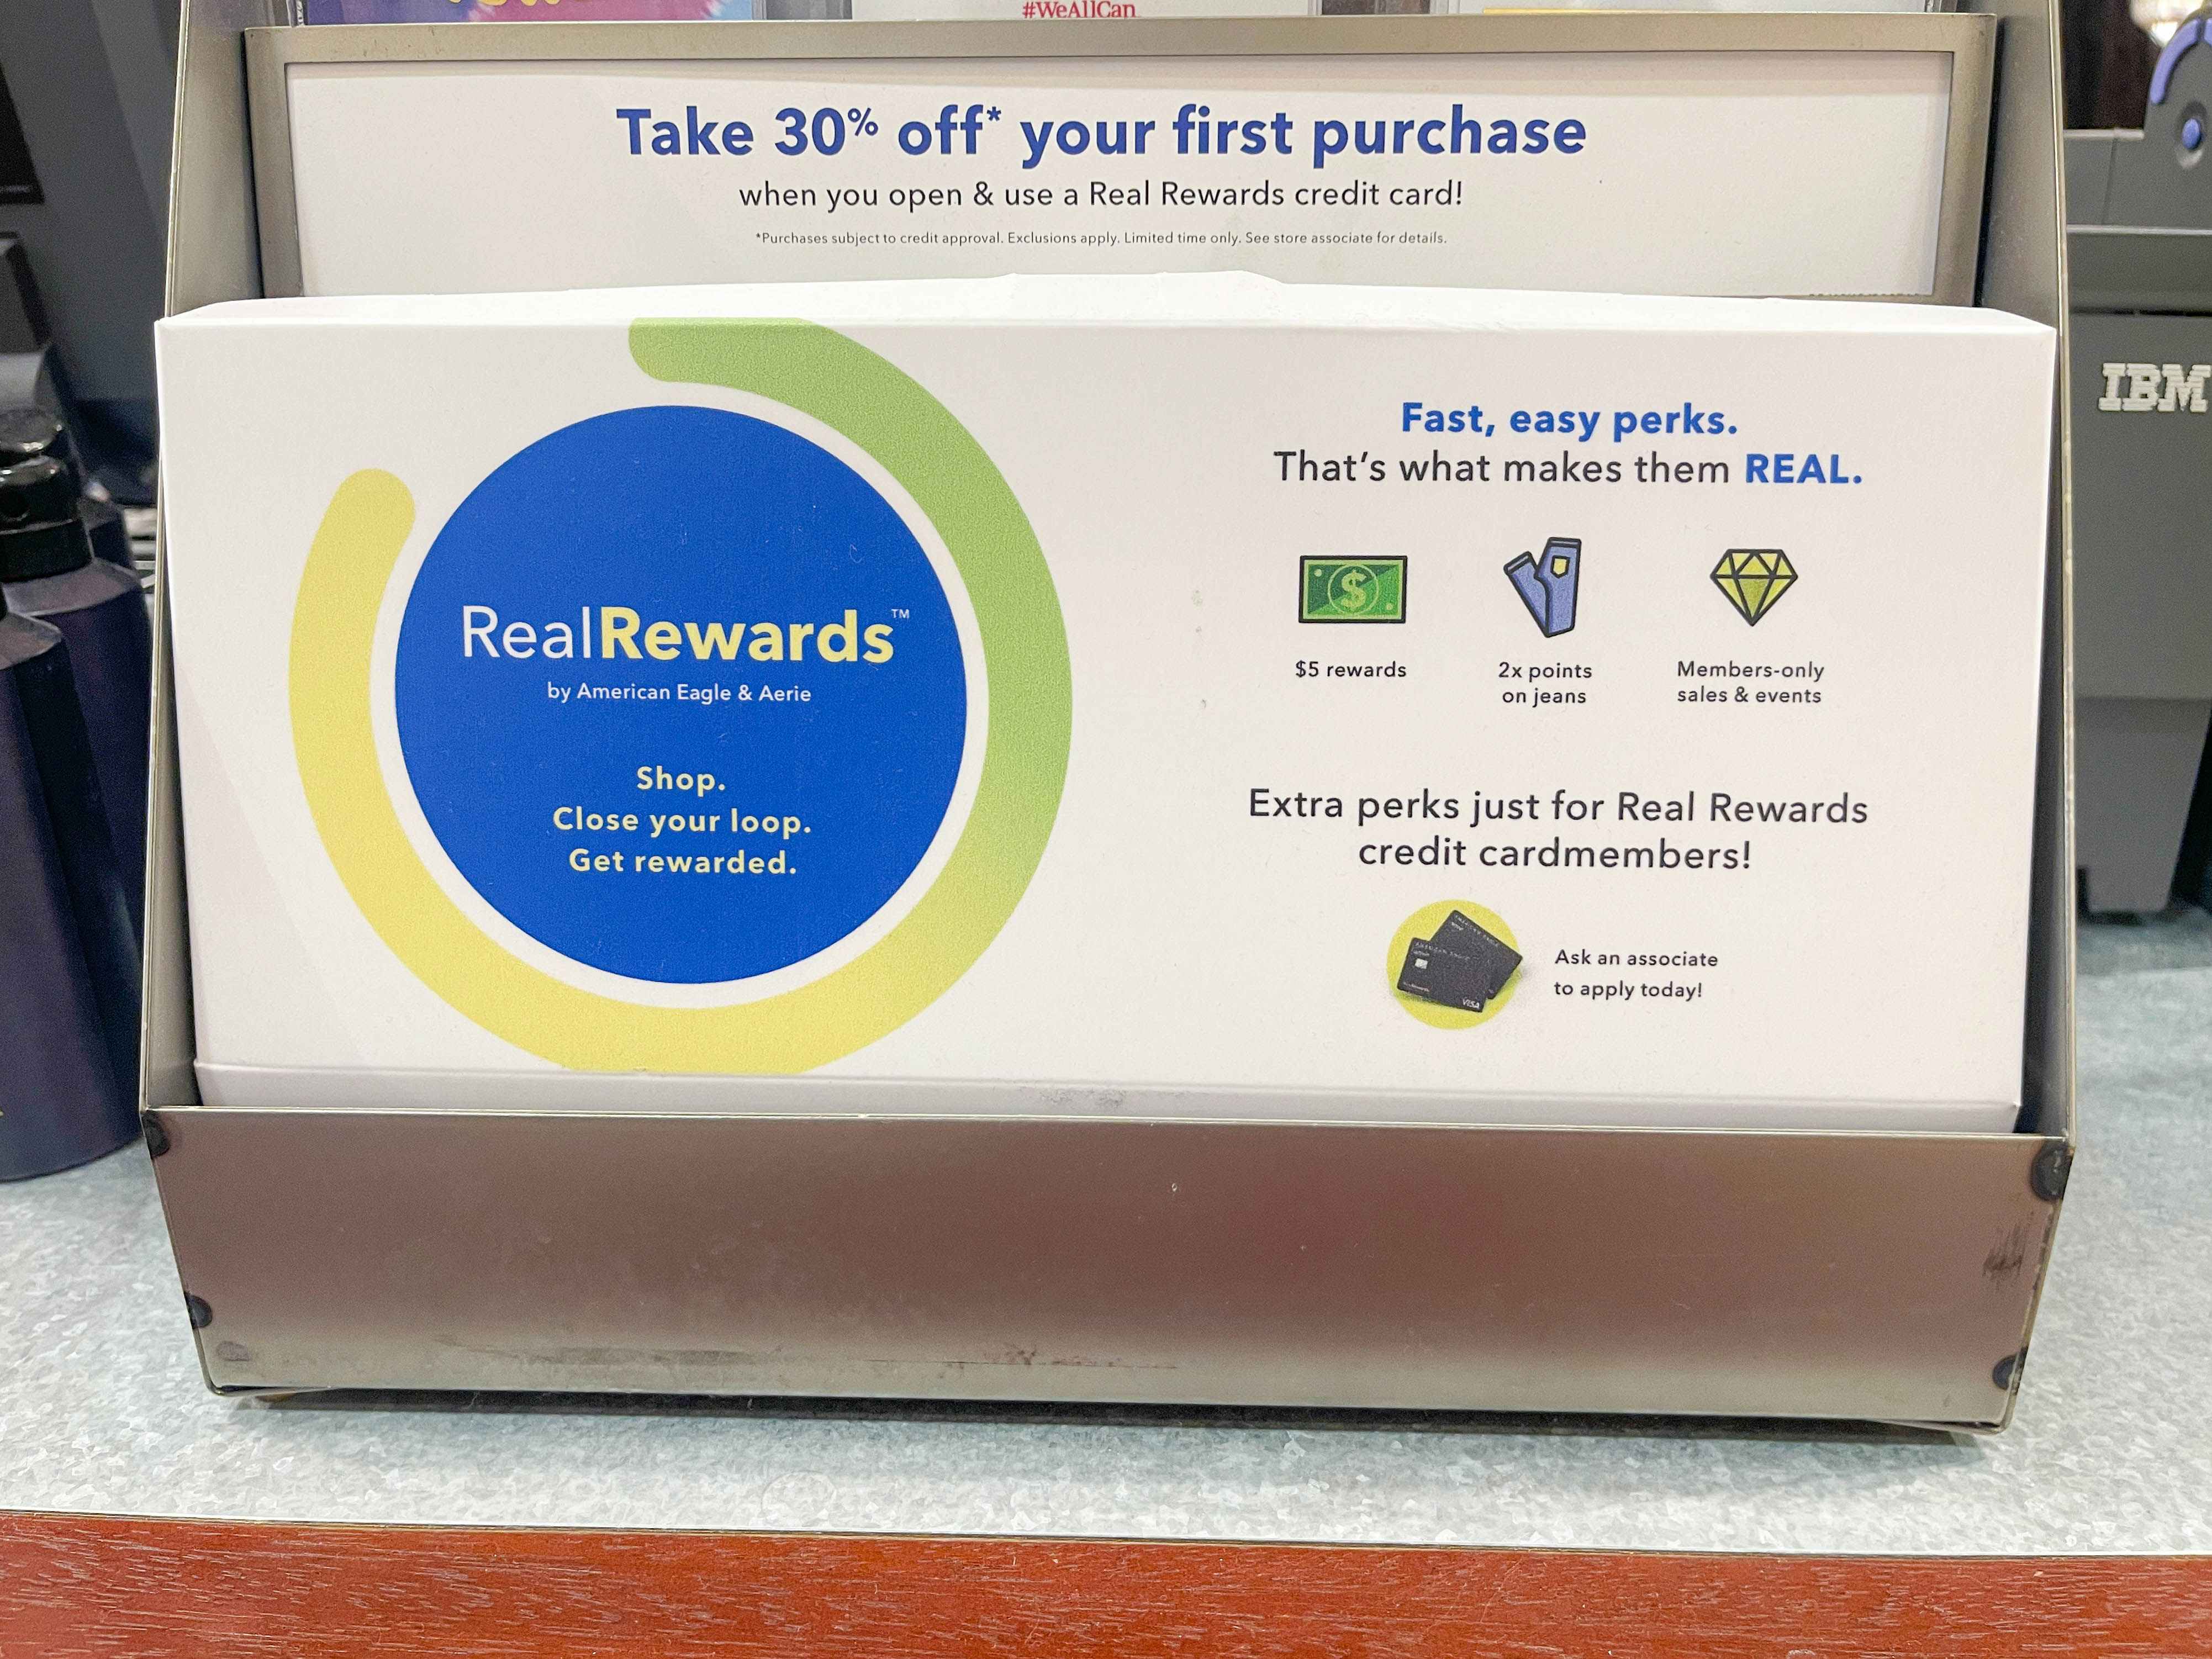 A sign for Real Rewards at the counter in an American Eagle store